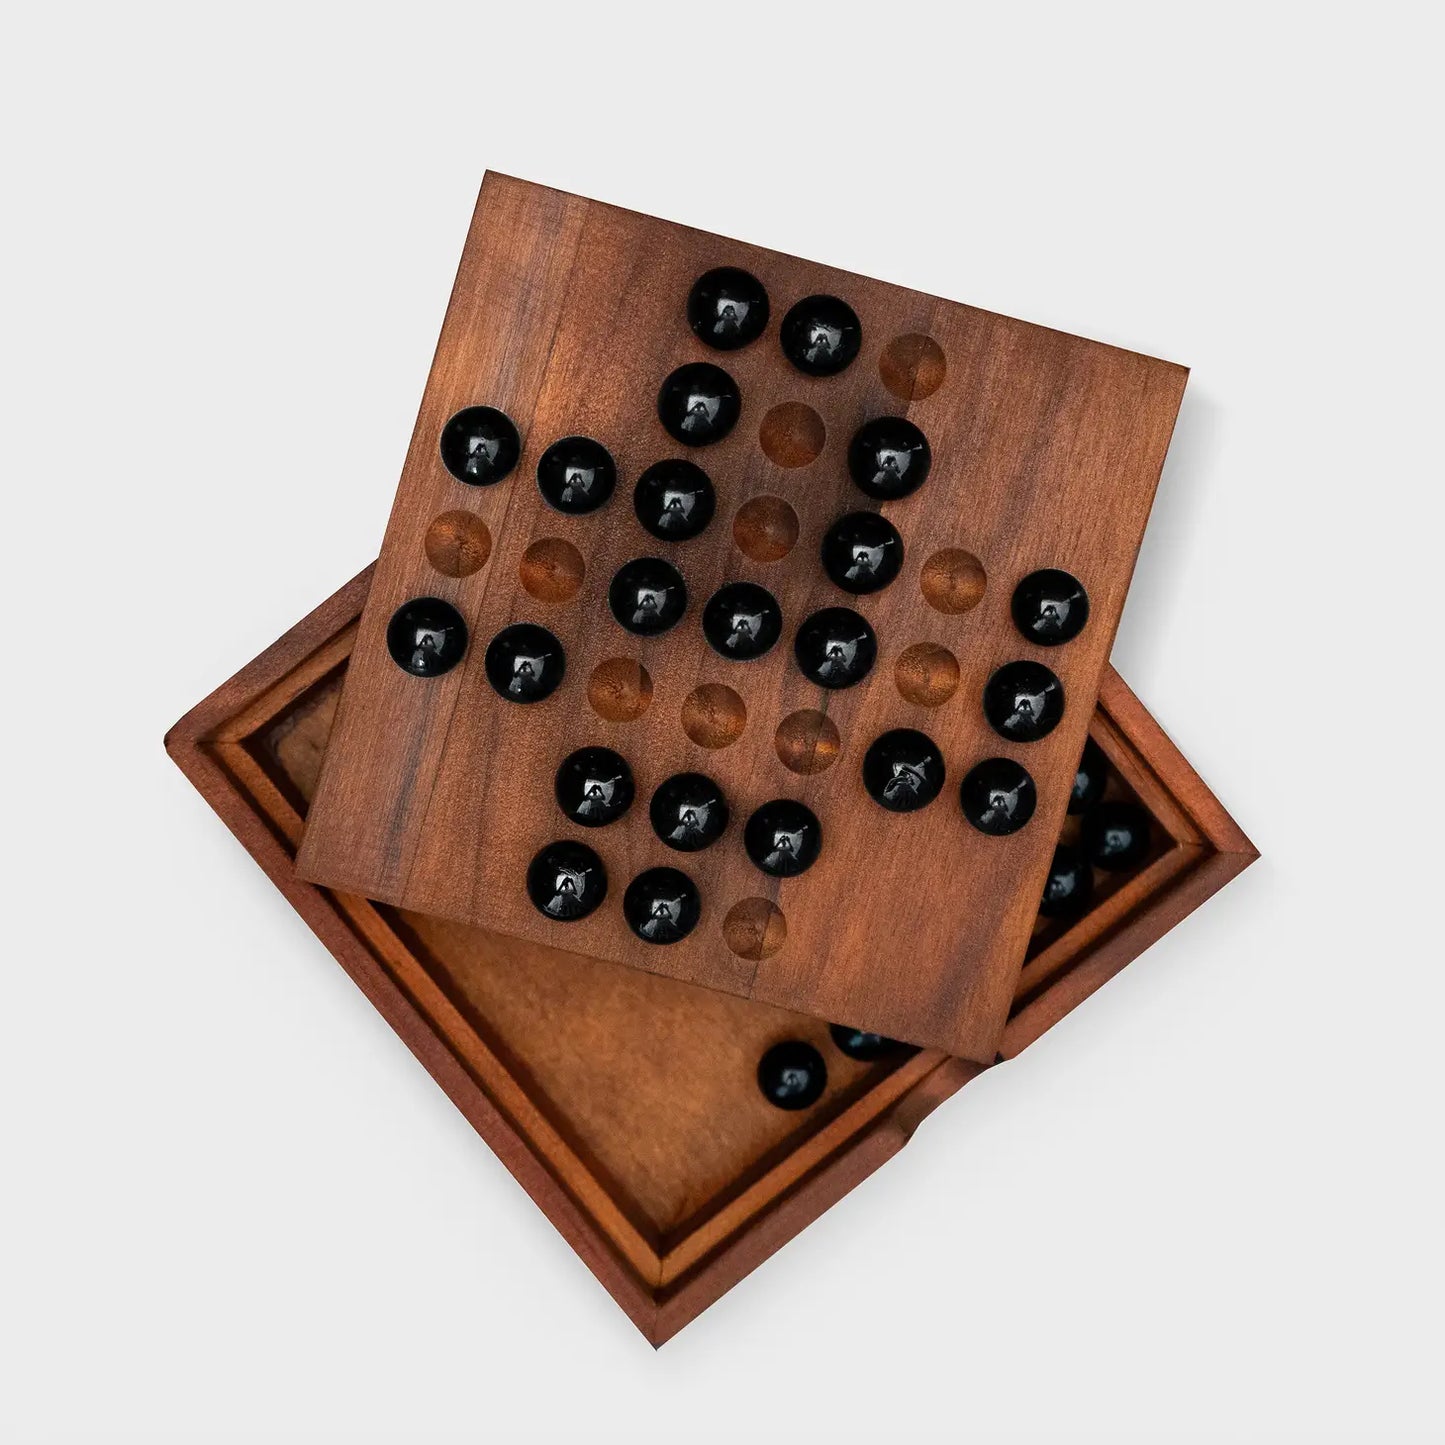 Wooden solitaire game